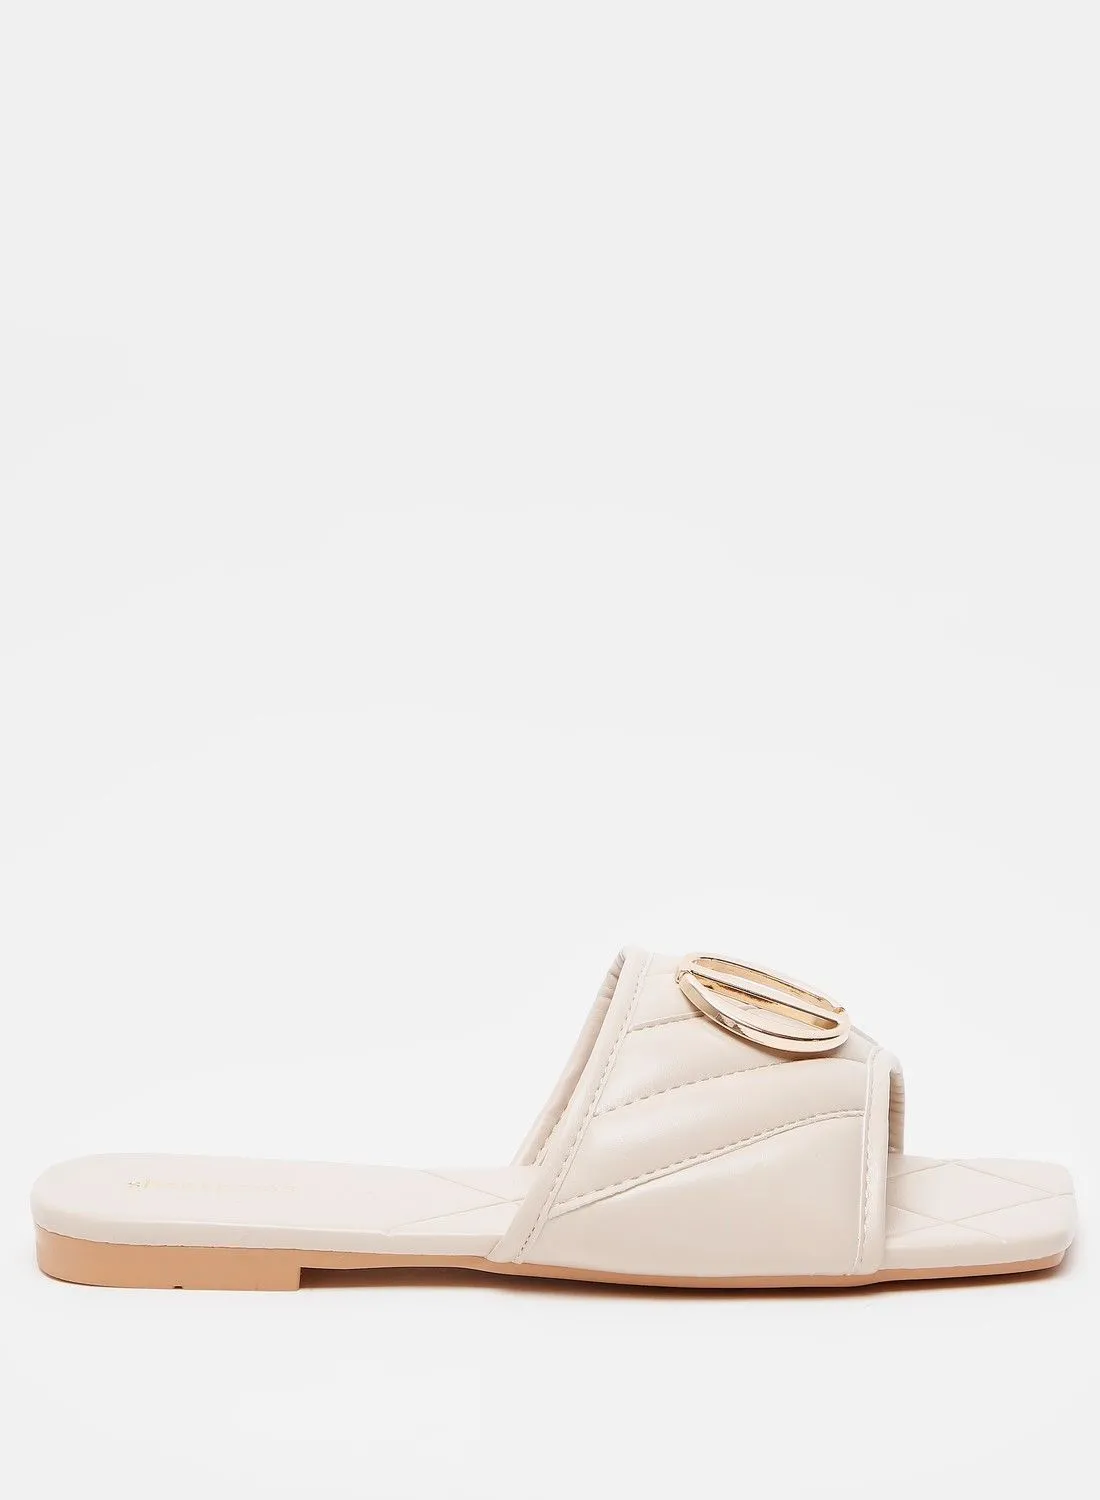 shoexpress Quilted Open Toe Slip-On Sandals With Metal Accent